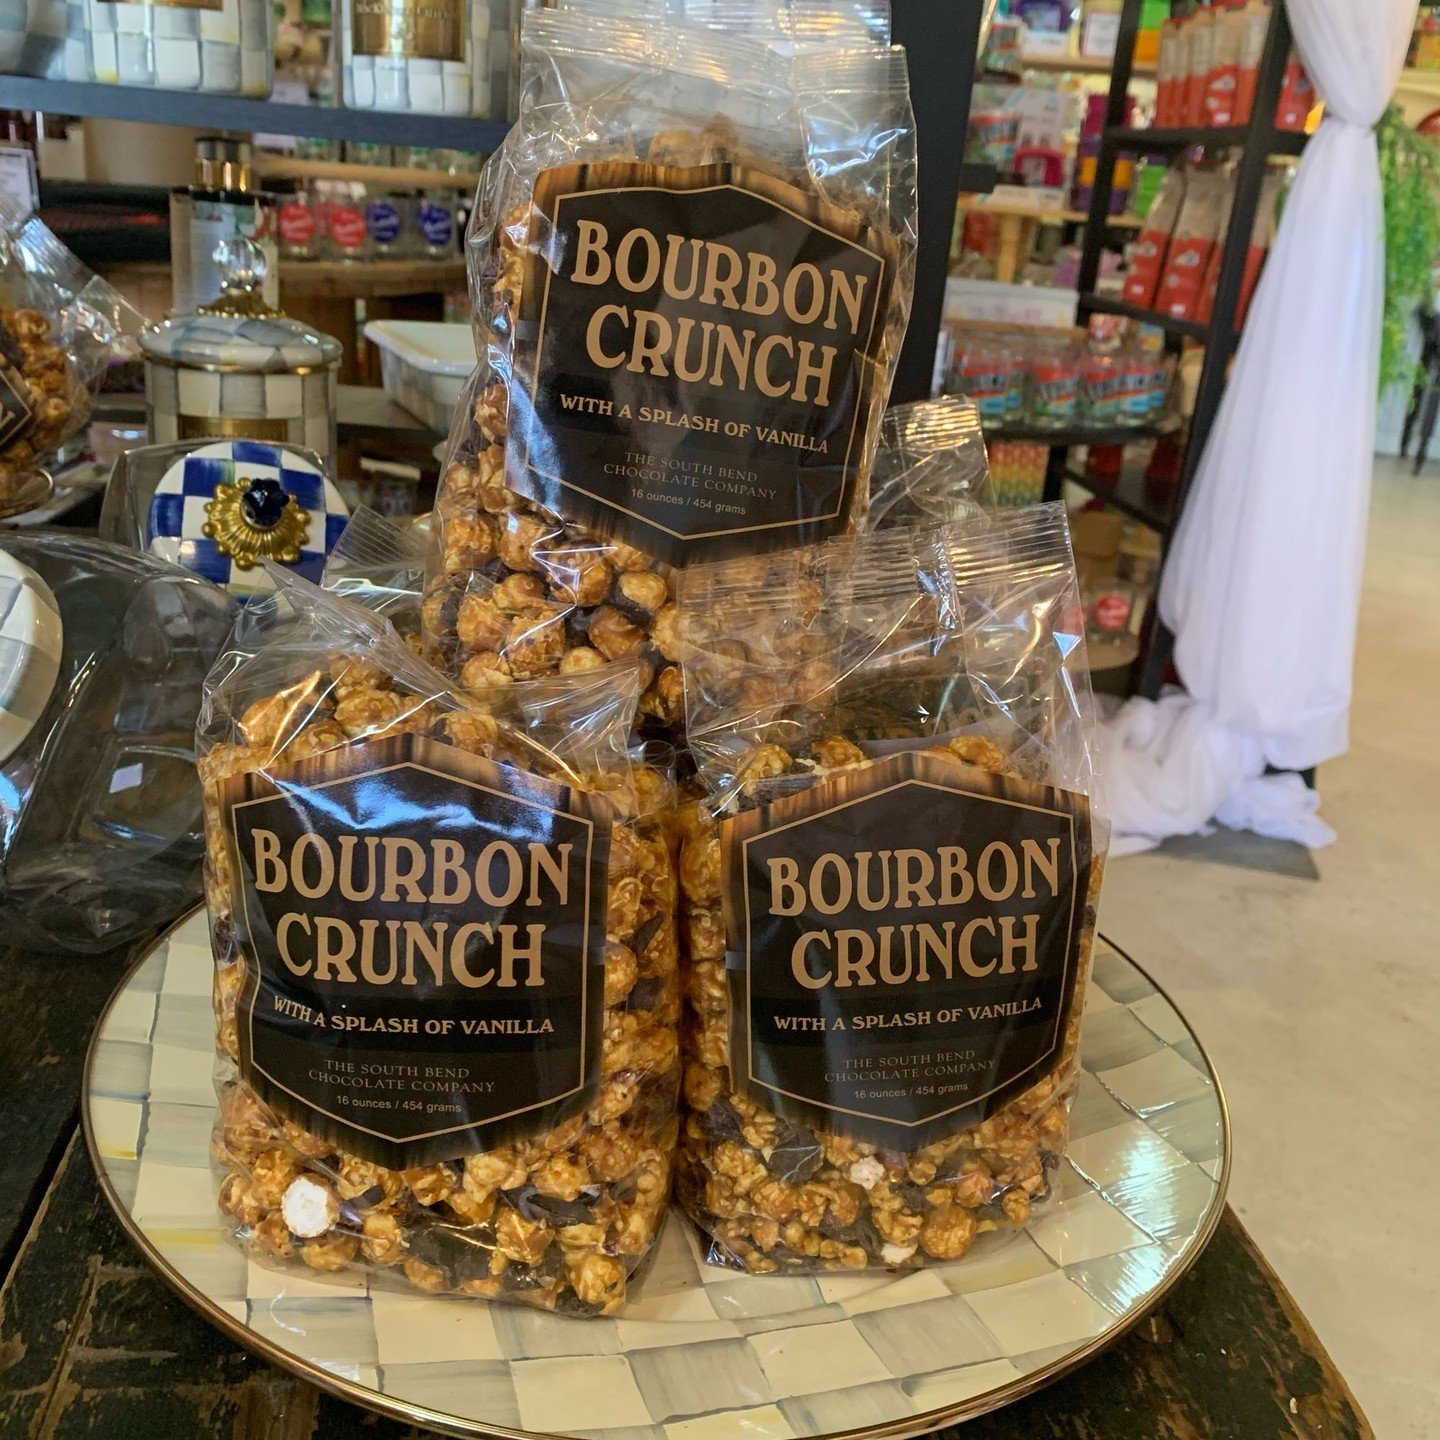 Need a sweet crunch? This Bourbon Crunch is a best seller and for good reason! Perfect for snacking or gifting! 

Shop here 👉🏼 https://www.bbqandmore.biz/popcorn

Give the best gift, host the best gathering, have the most fun.
🏬Shop in Store: 321 